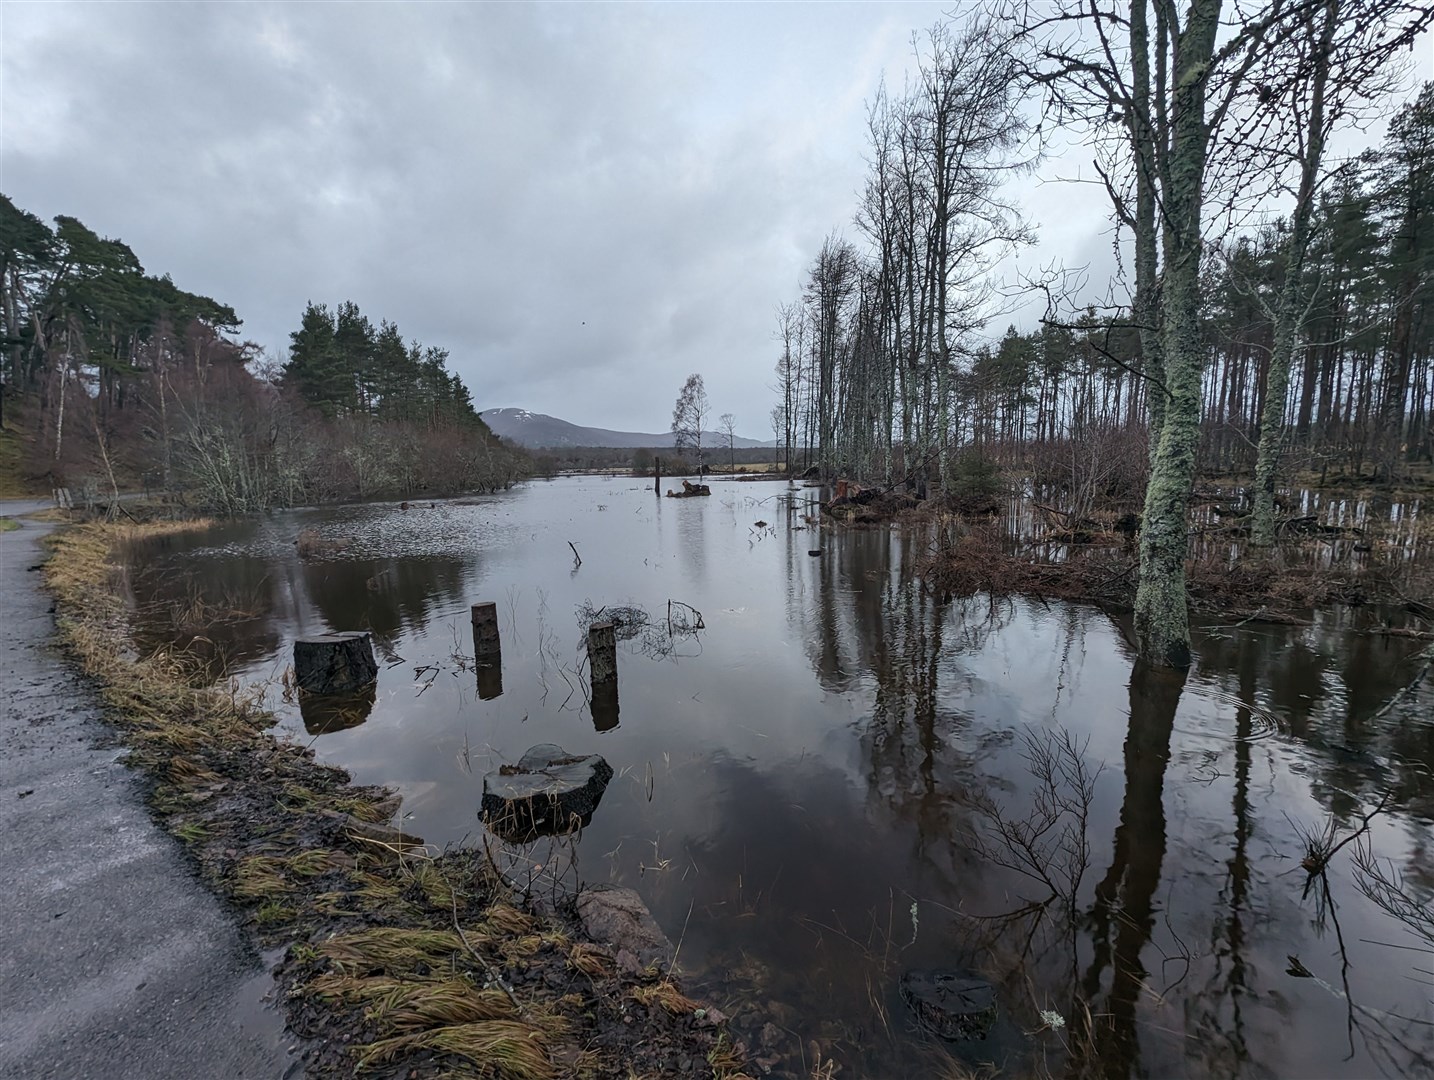 Waters continue to rise today by The Brae beween Kincraig and the Loch Insh Outdoor Centre